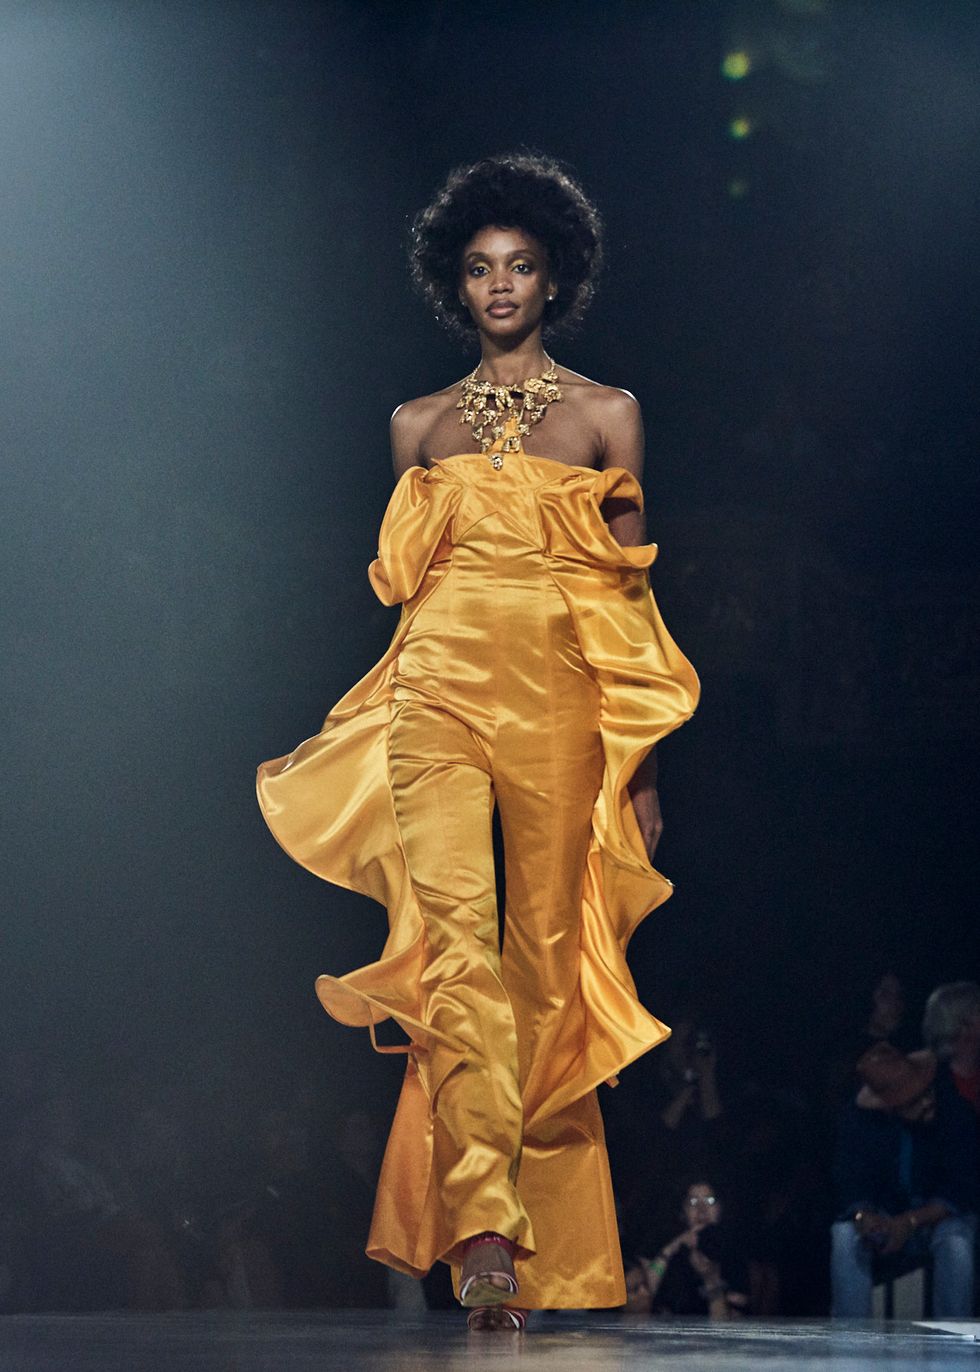 Pyer Moss Delivered the Biggest, Most Powerful Show at NYFW - PAPER ...